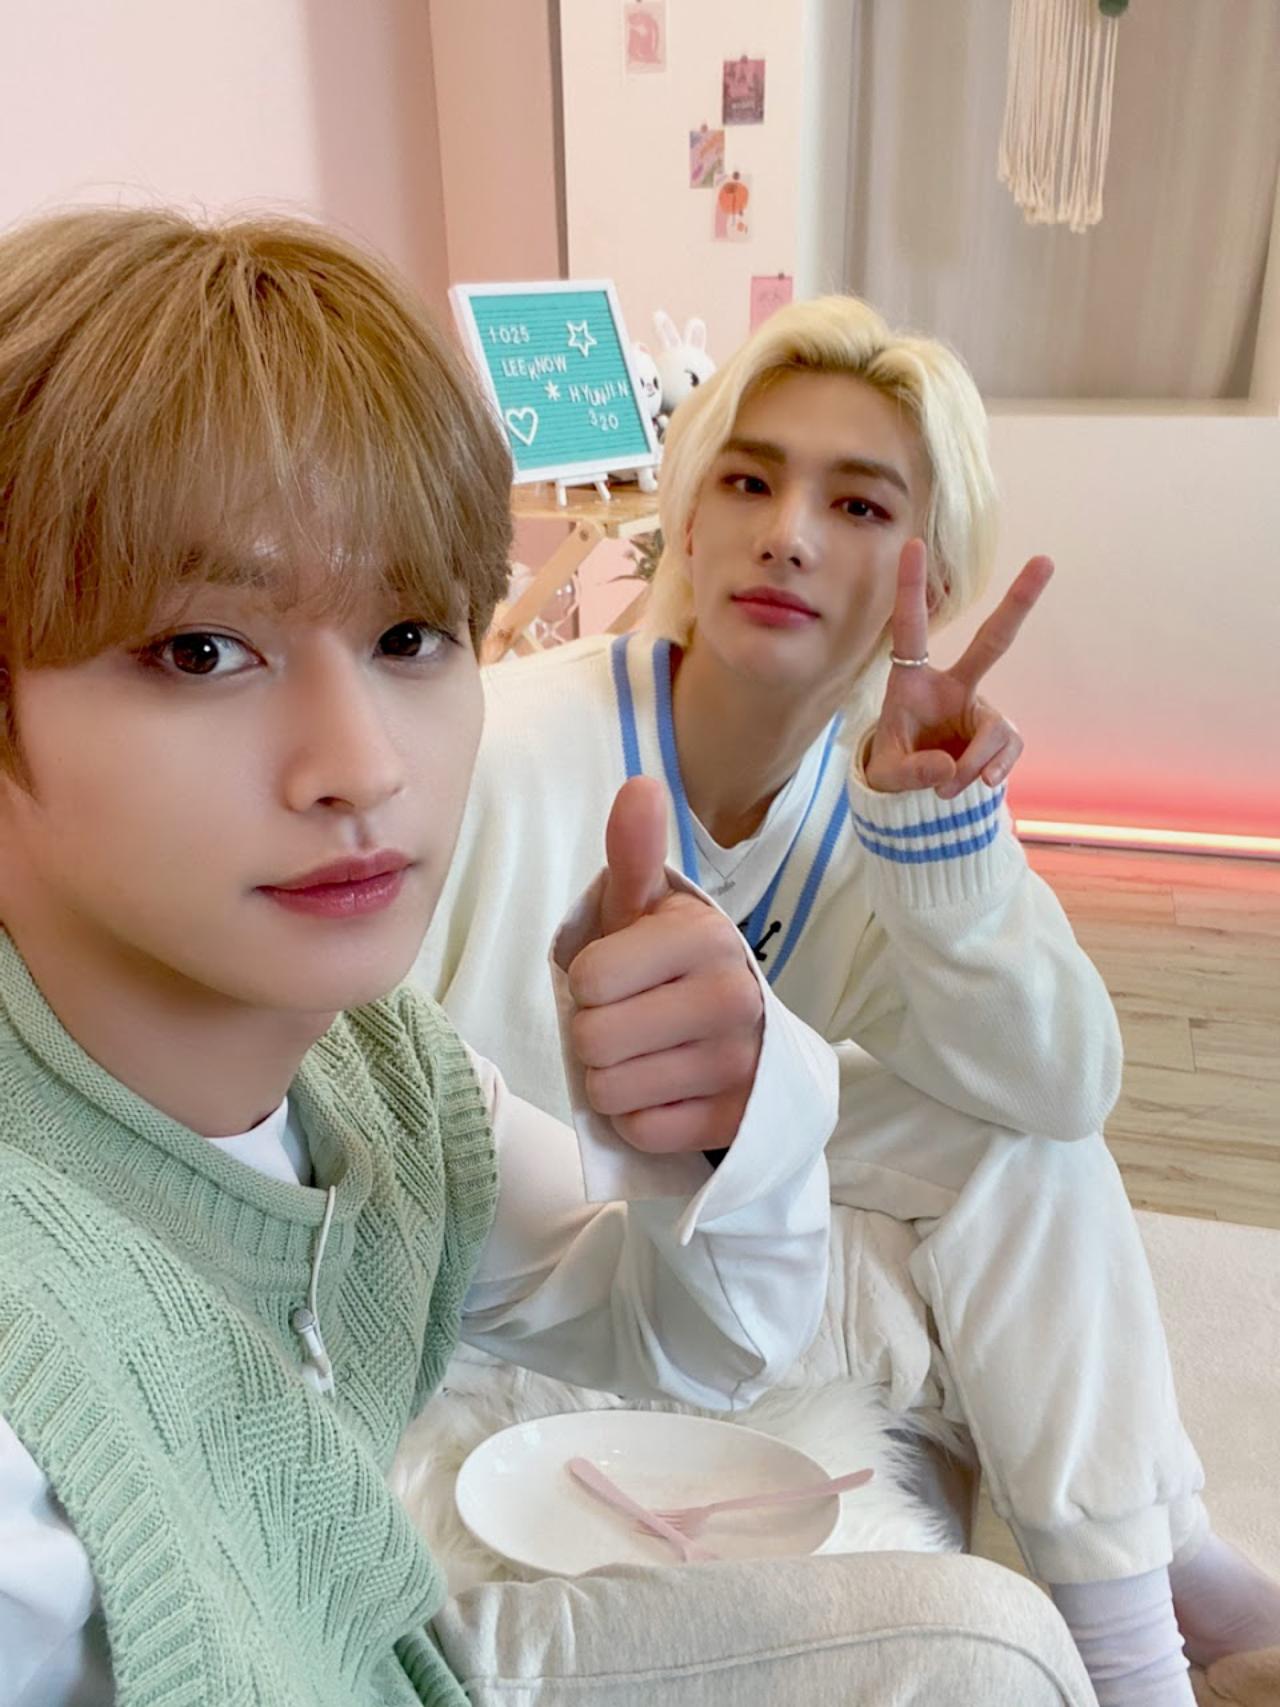 Stray Kids' Lee Know and Hyunjin
This laugh-a-minute duo, Lee Know and Hyunjin, are fan favorites thanks to the legendary tissue tale. Lee Know hilariously warns he'll cram Hyunjin's mouth with tissues when they're butting heads. But that's not their only unique way of sorting out their squabbles - STAYs will recall the unforgettable air fryer episode. Their comical friendship is just pure gold!